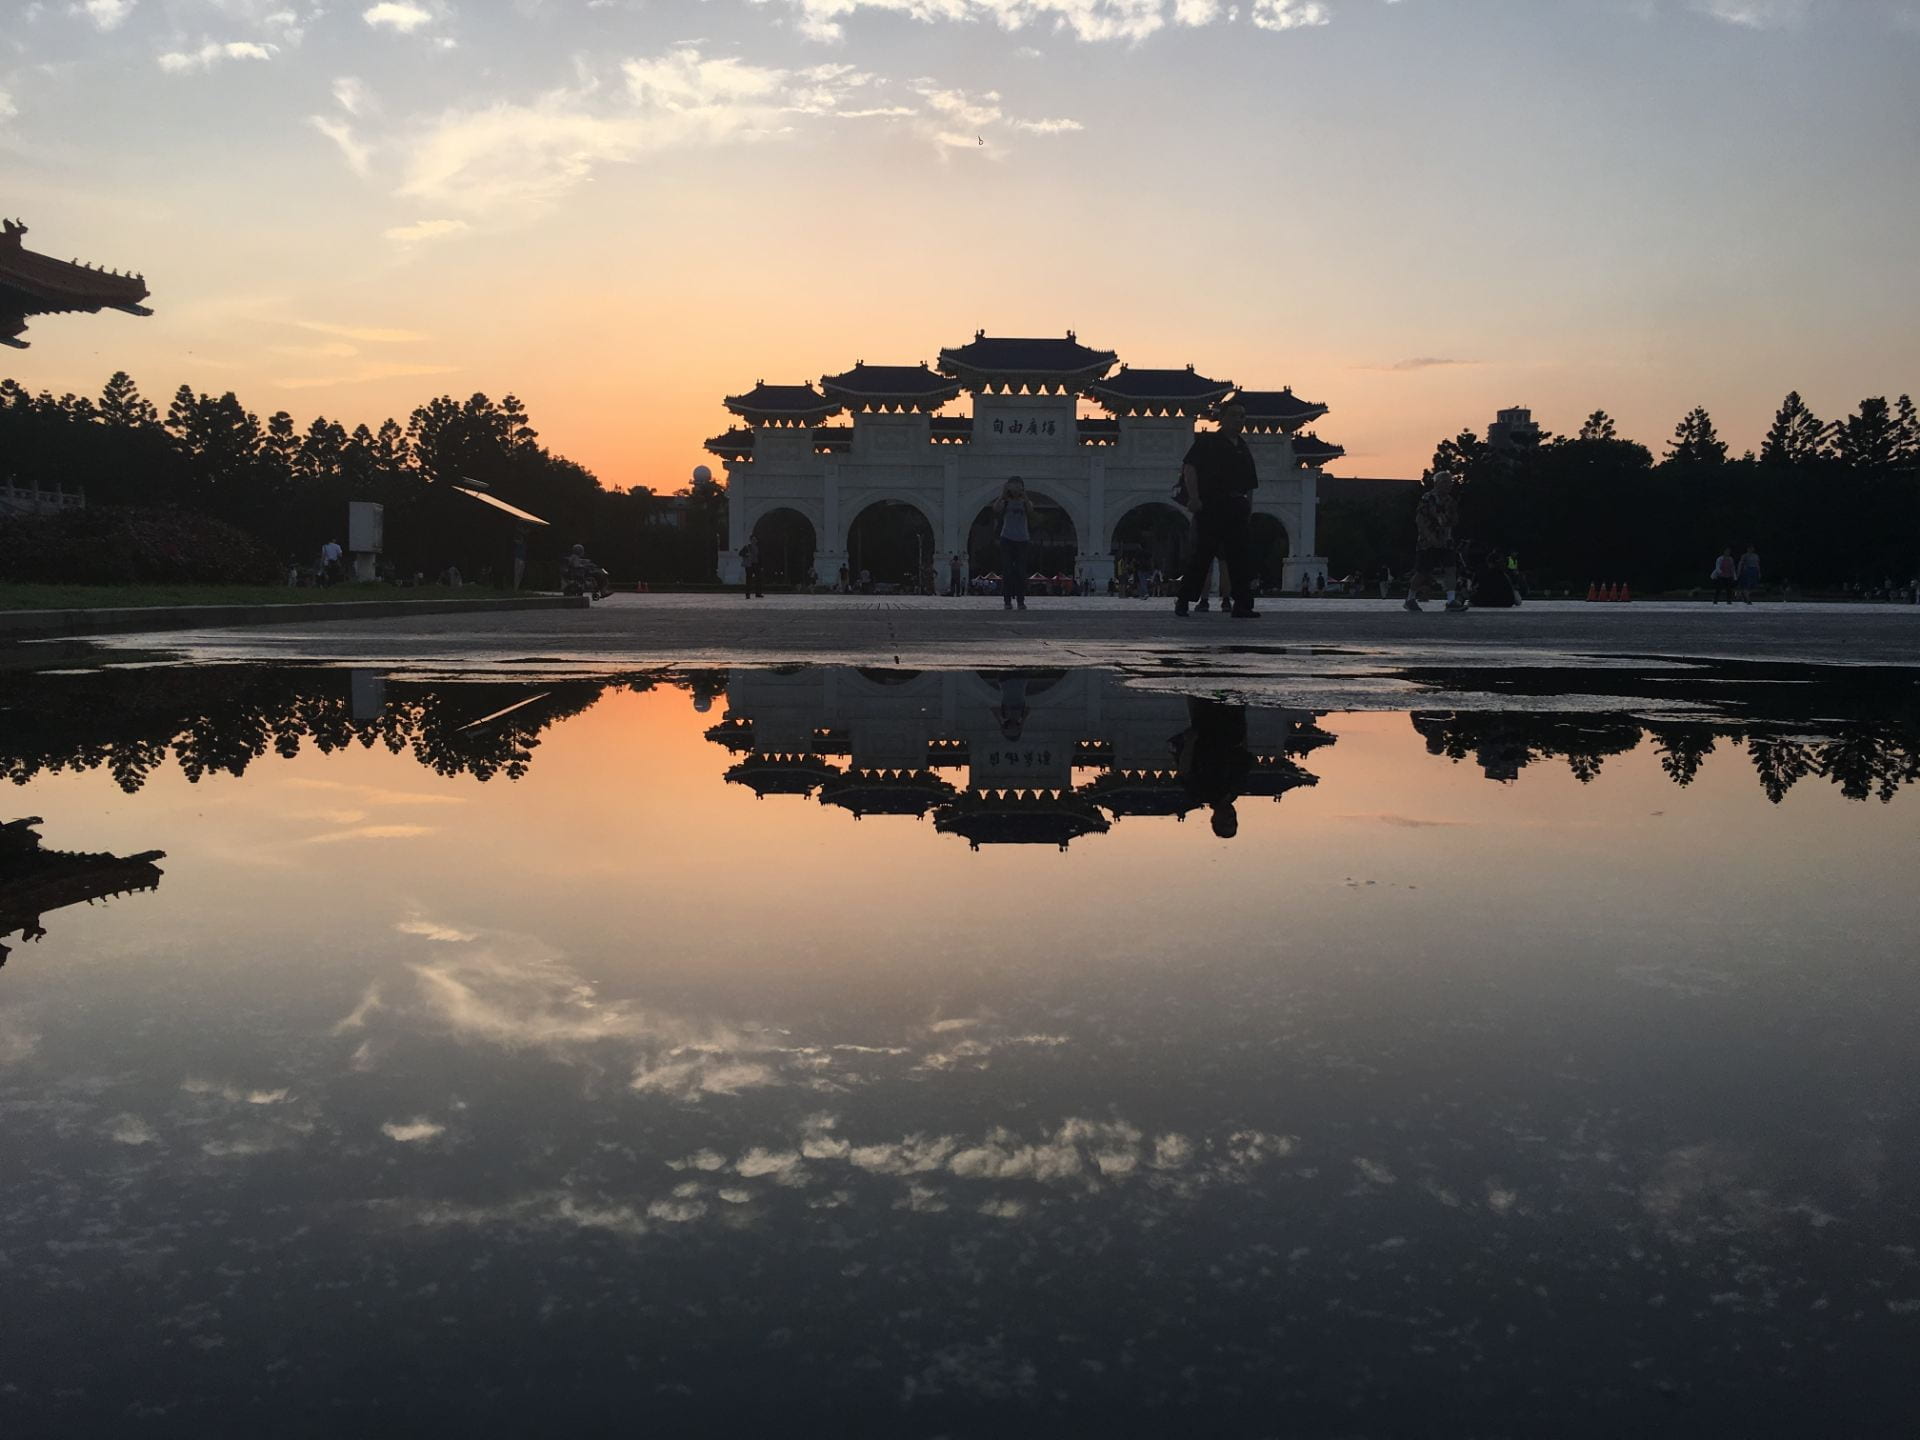 Chiang kai-Shek Memorial Hall at sunset with reflection in a large puddle of water